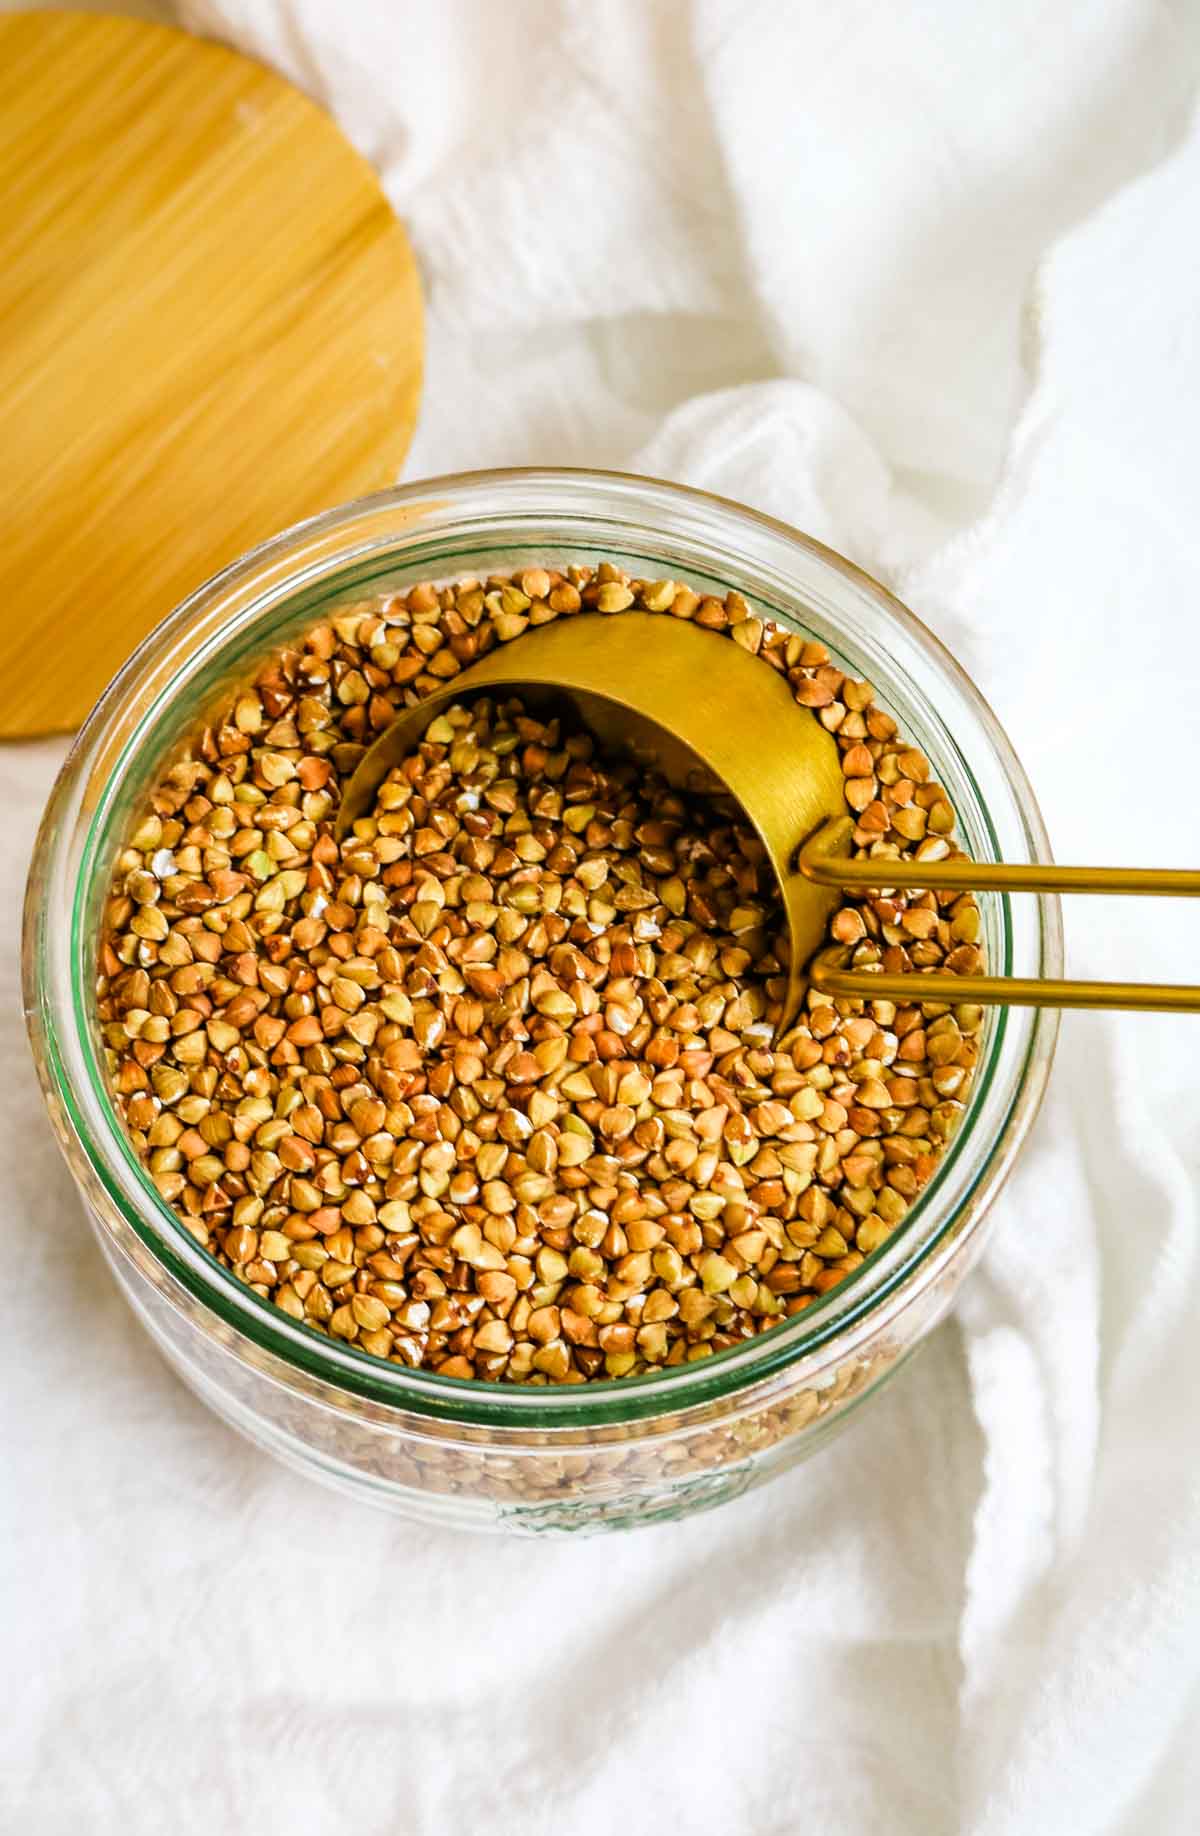 Instant Pot Buckwheat is perfectly fluffy, tender, and always delicious. This ancient grain is joined with modern convenience for a hearty and nutritious side dish that’s great with most meats, fish, and vegetables. 
